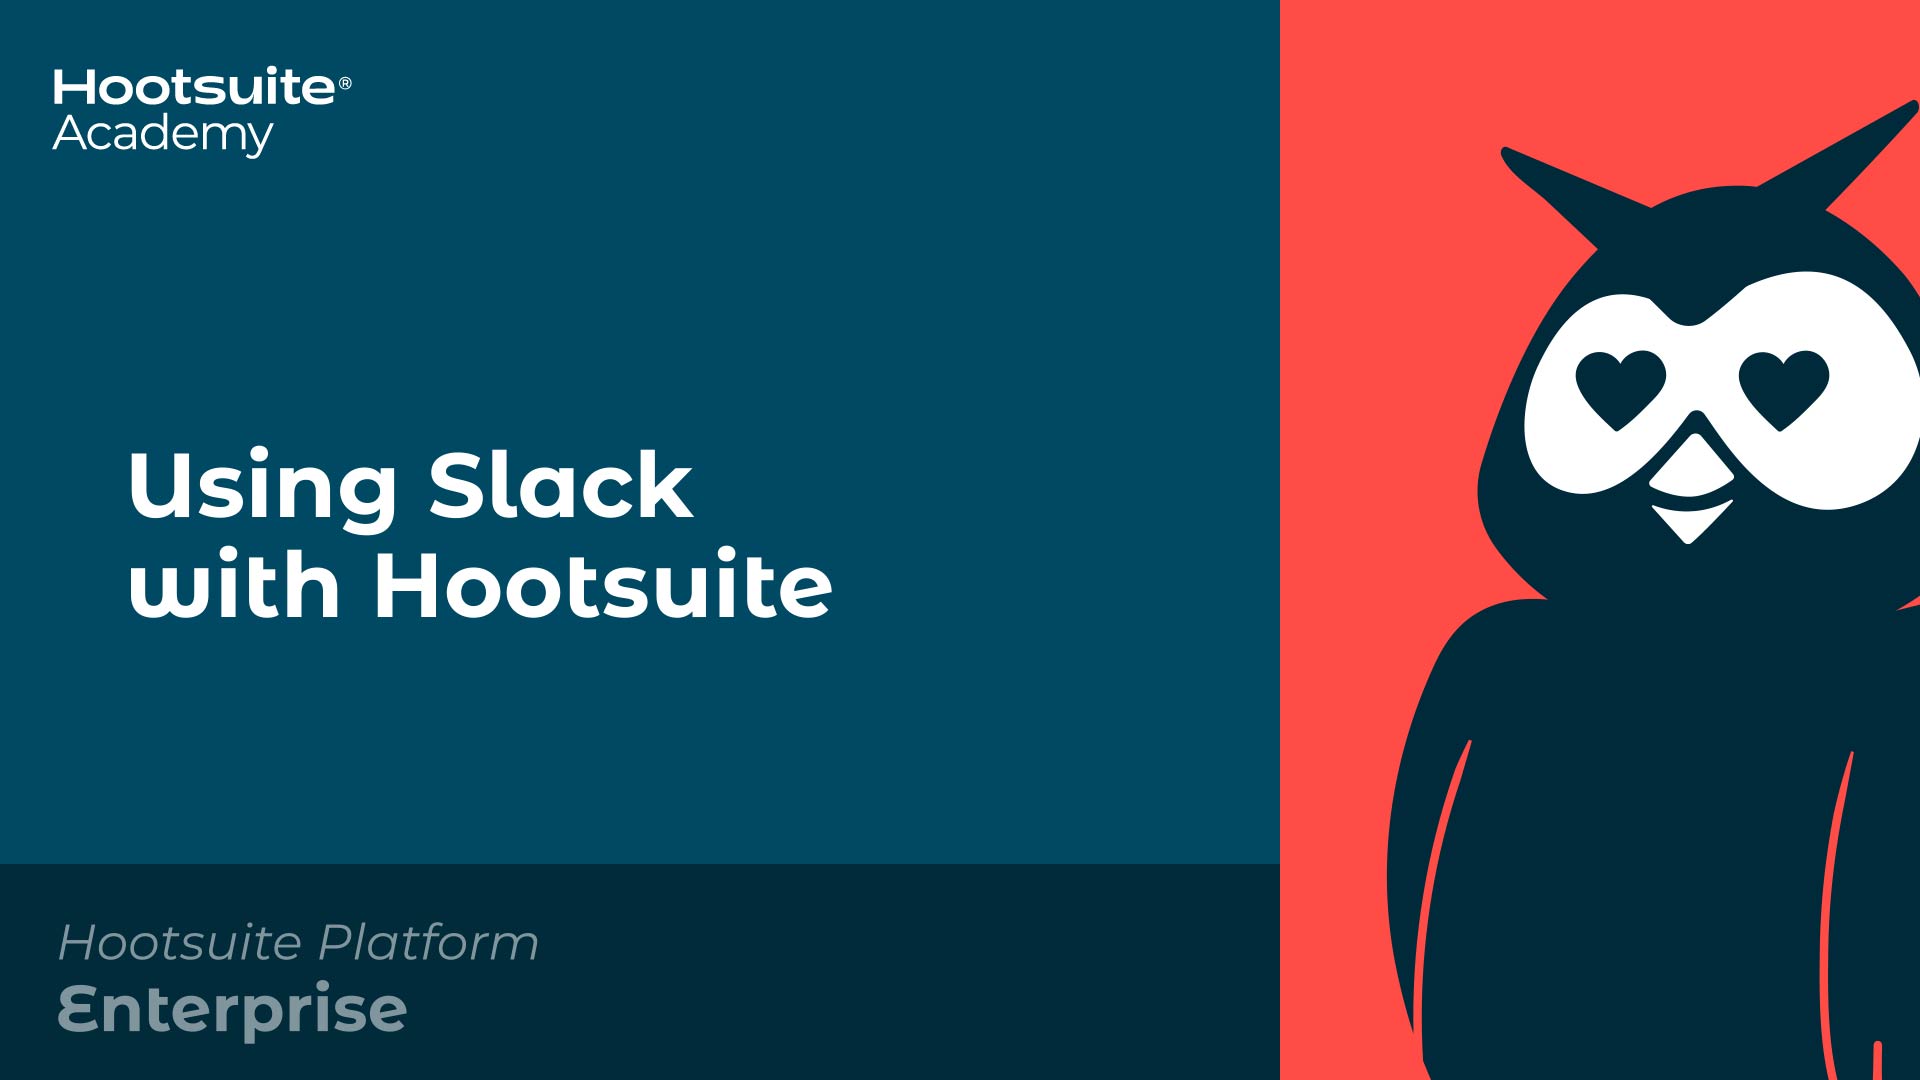 Using Slack with Hootsuite video.